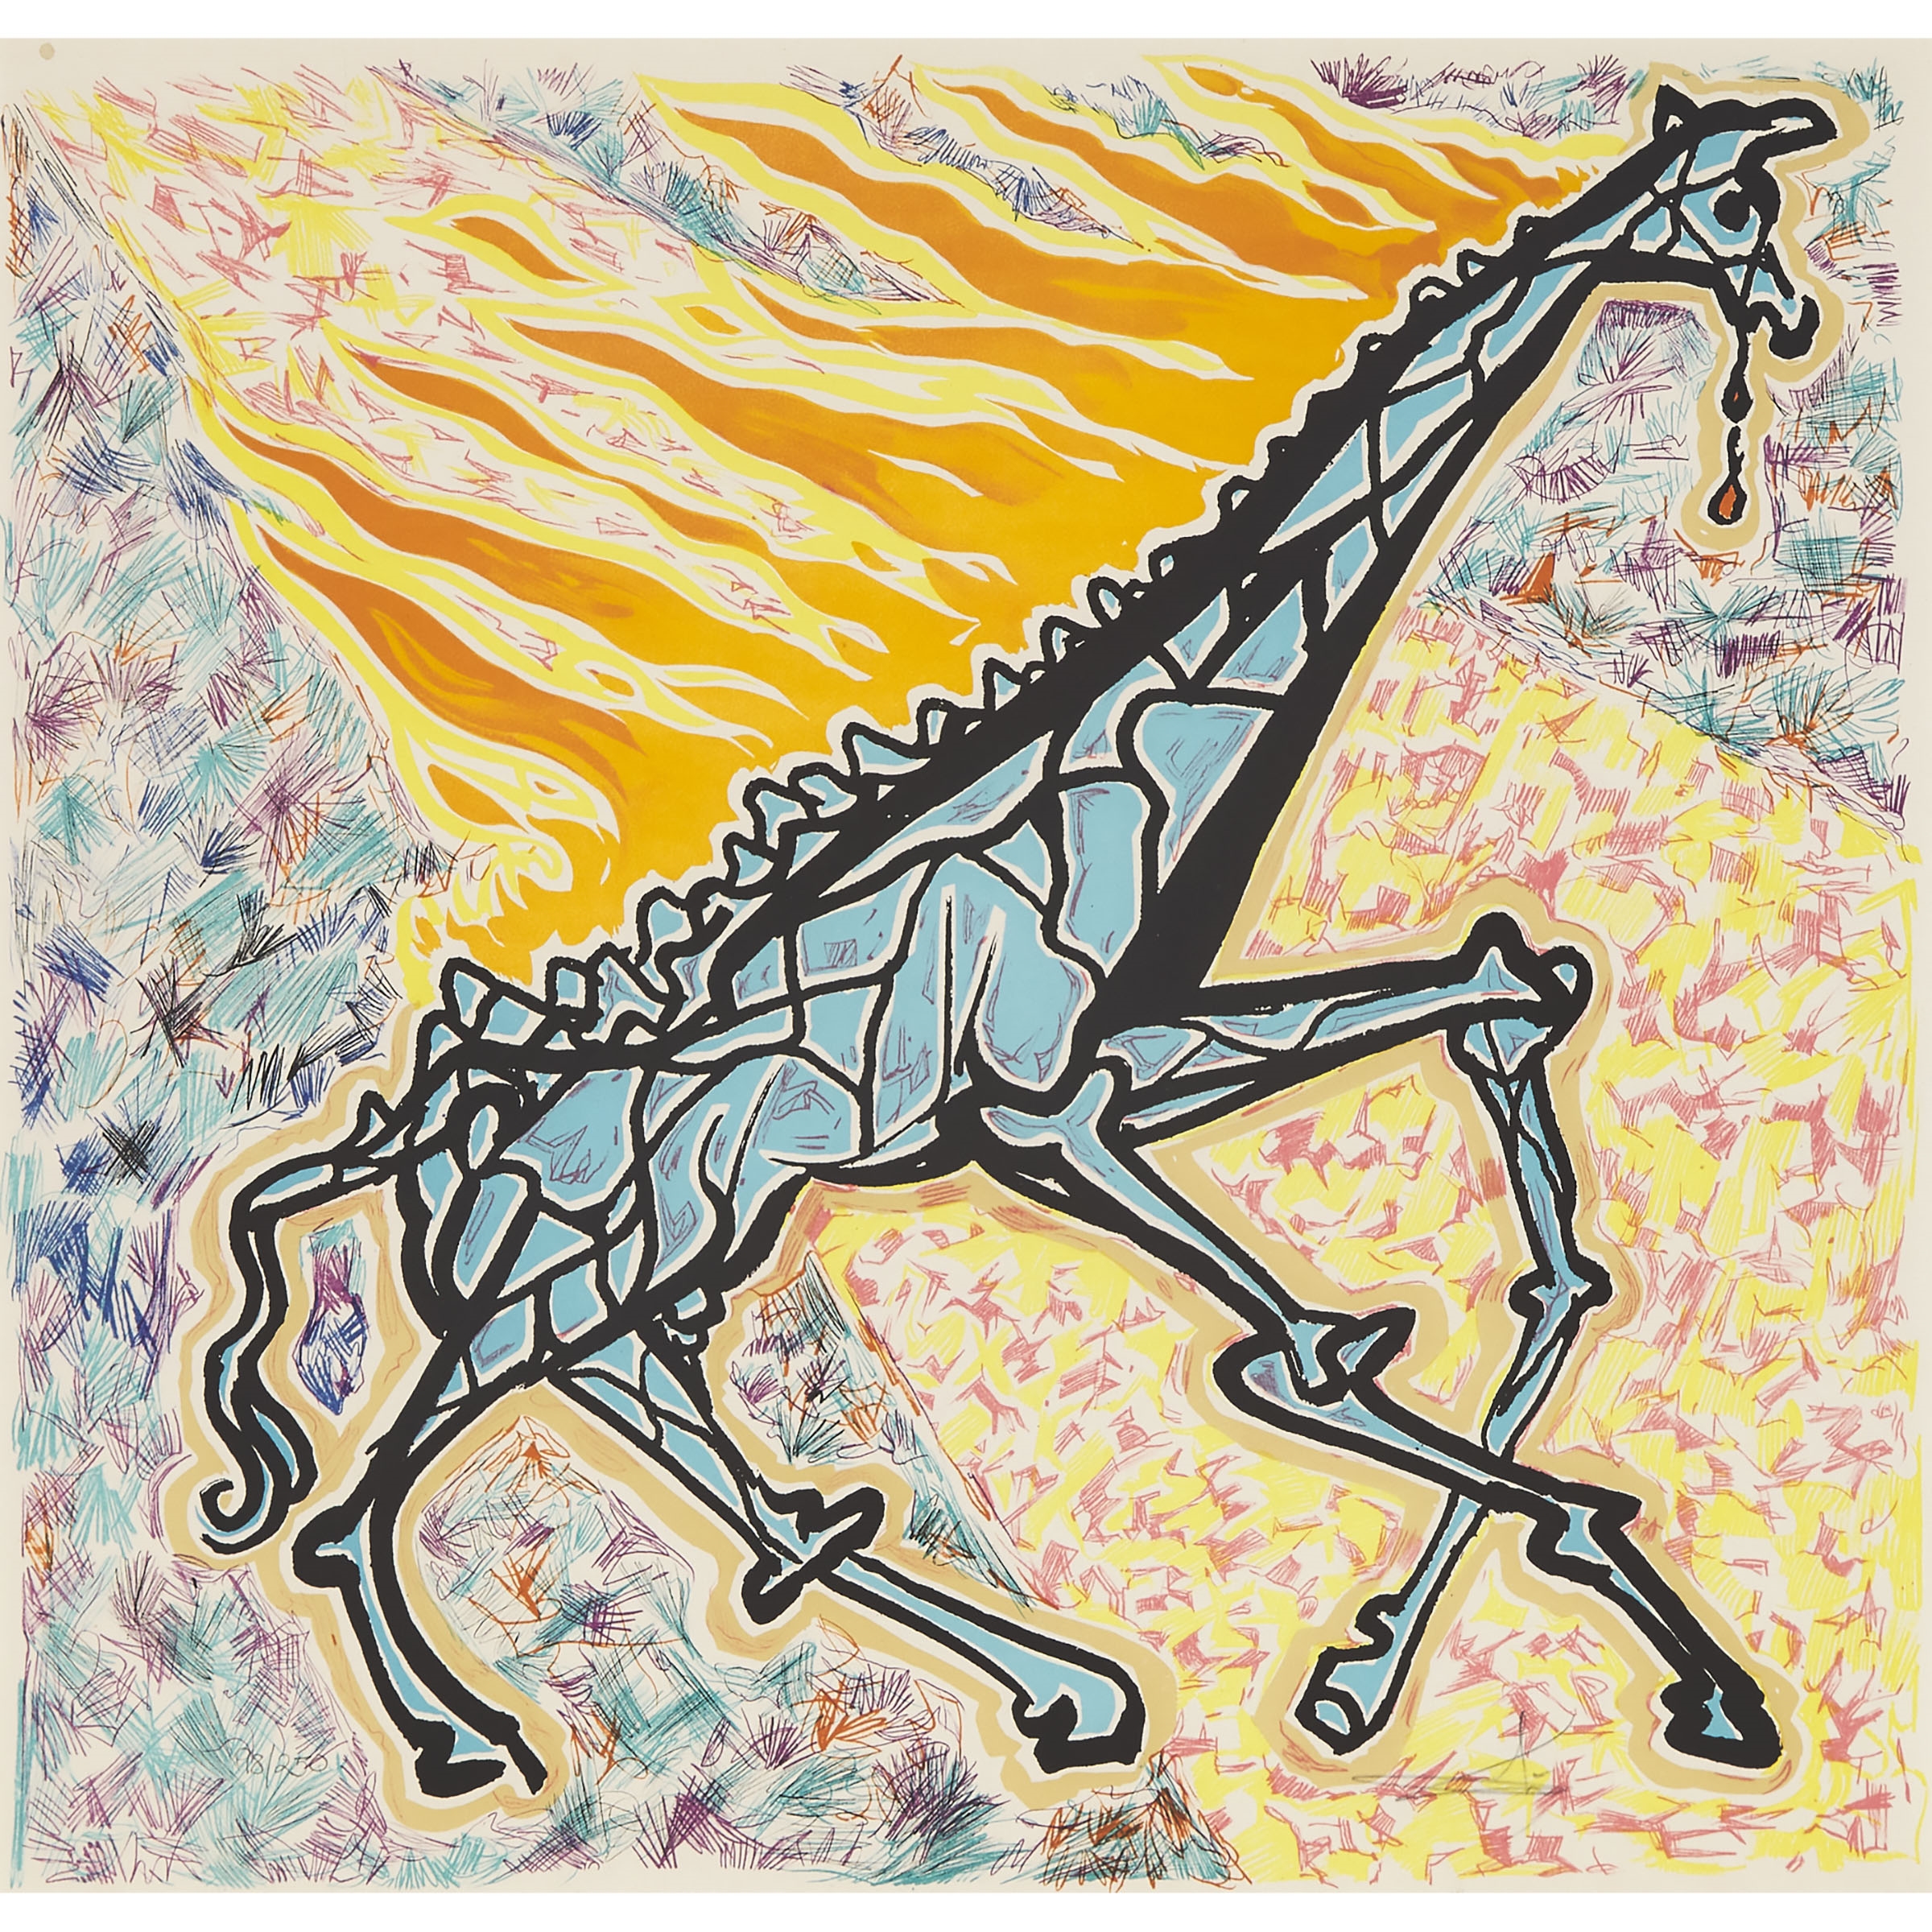 Artwork by Salvador Dalí, LE GIRAFE EN FEU, FROM LA JUNGLE HUMAINE, 1976 [F. 76-2A], Made of lithograph in colours on Arches paper